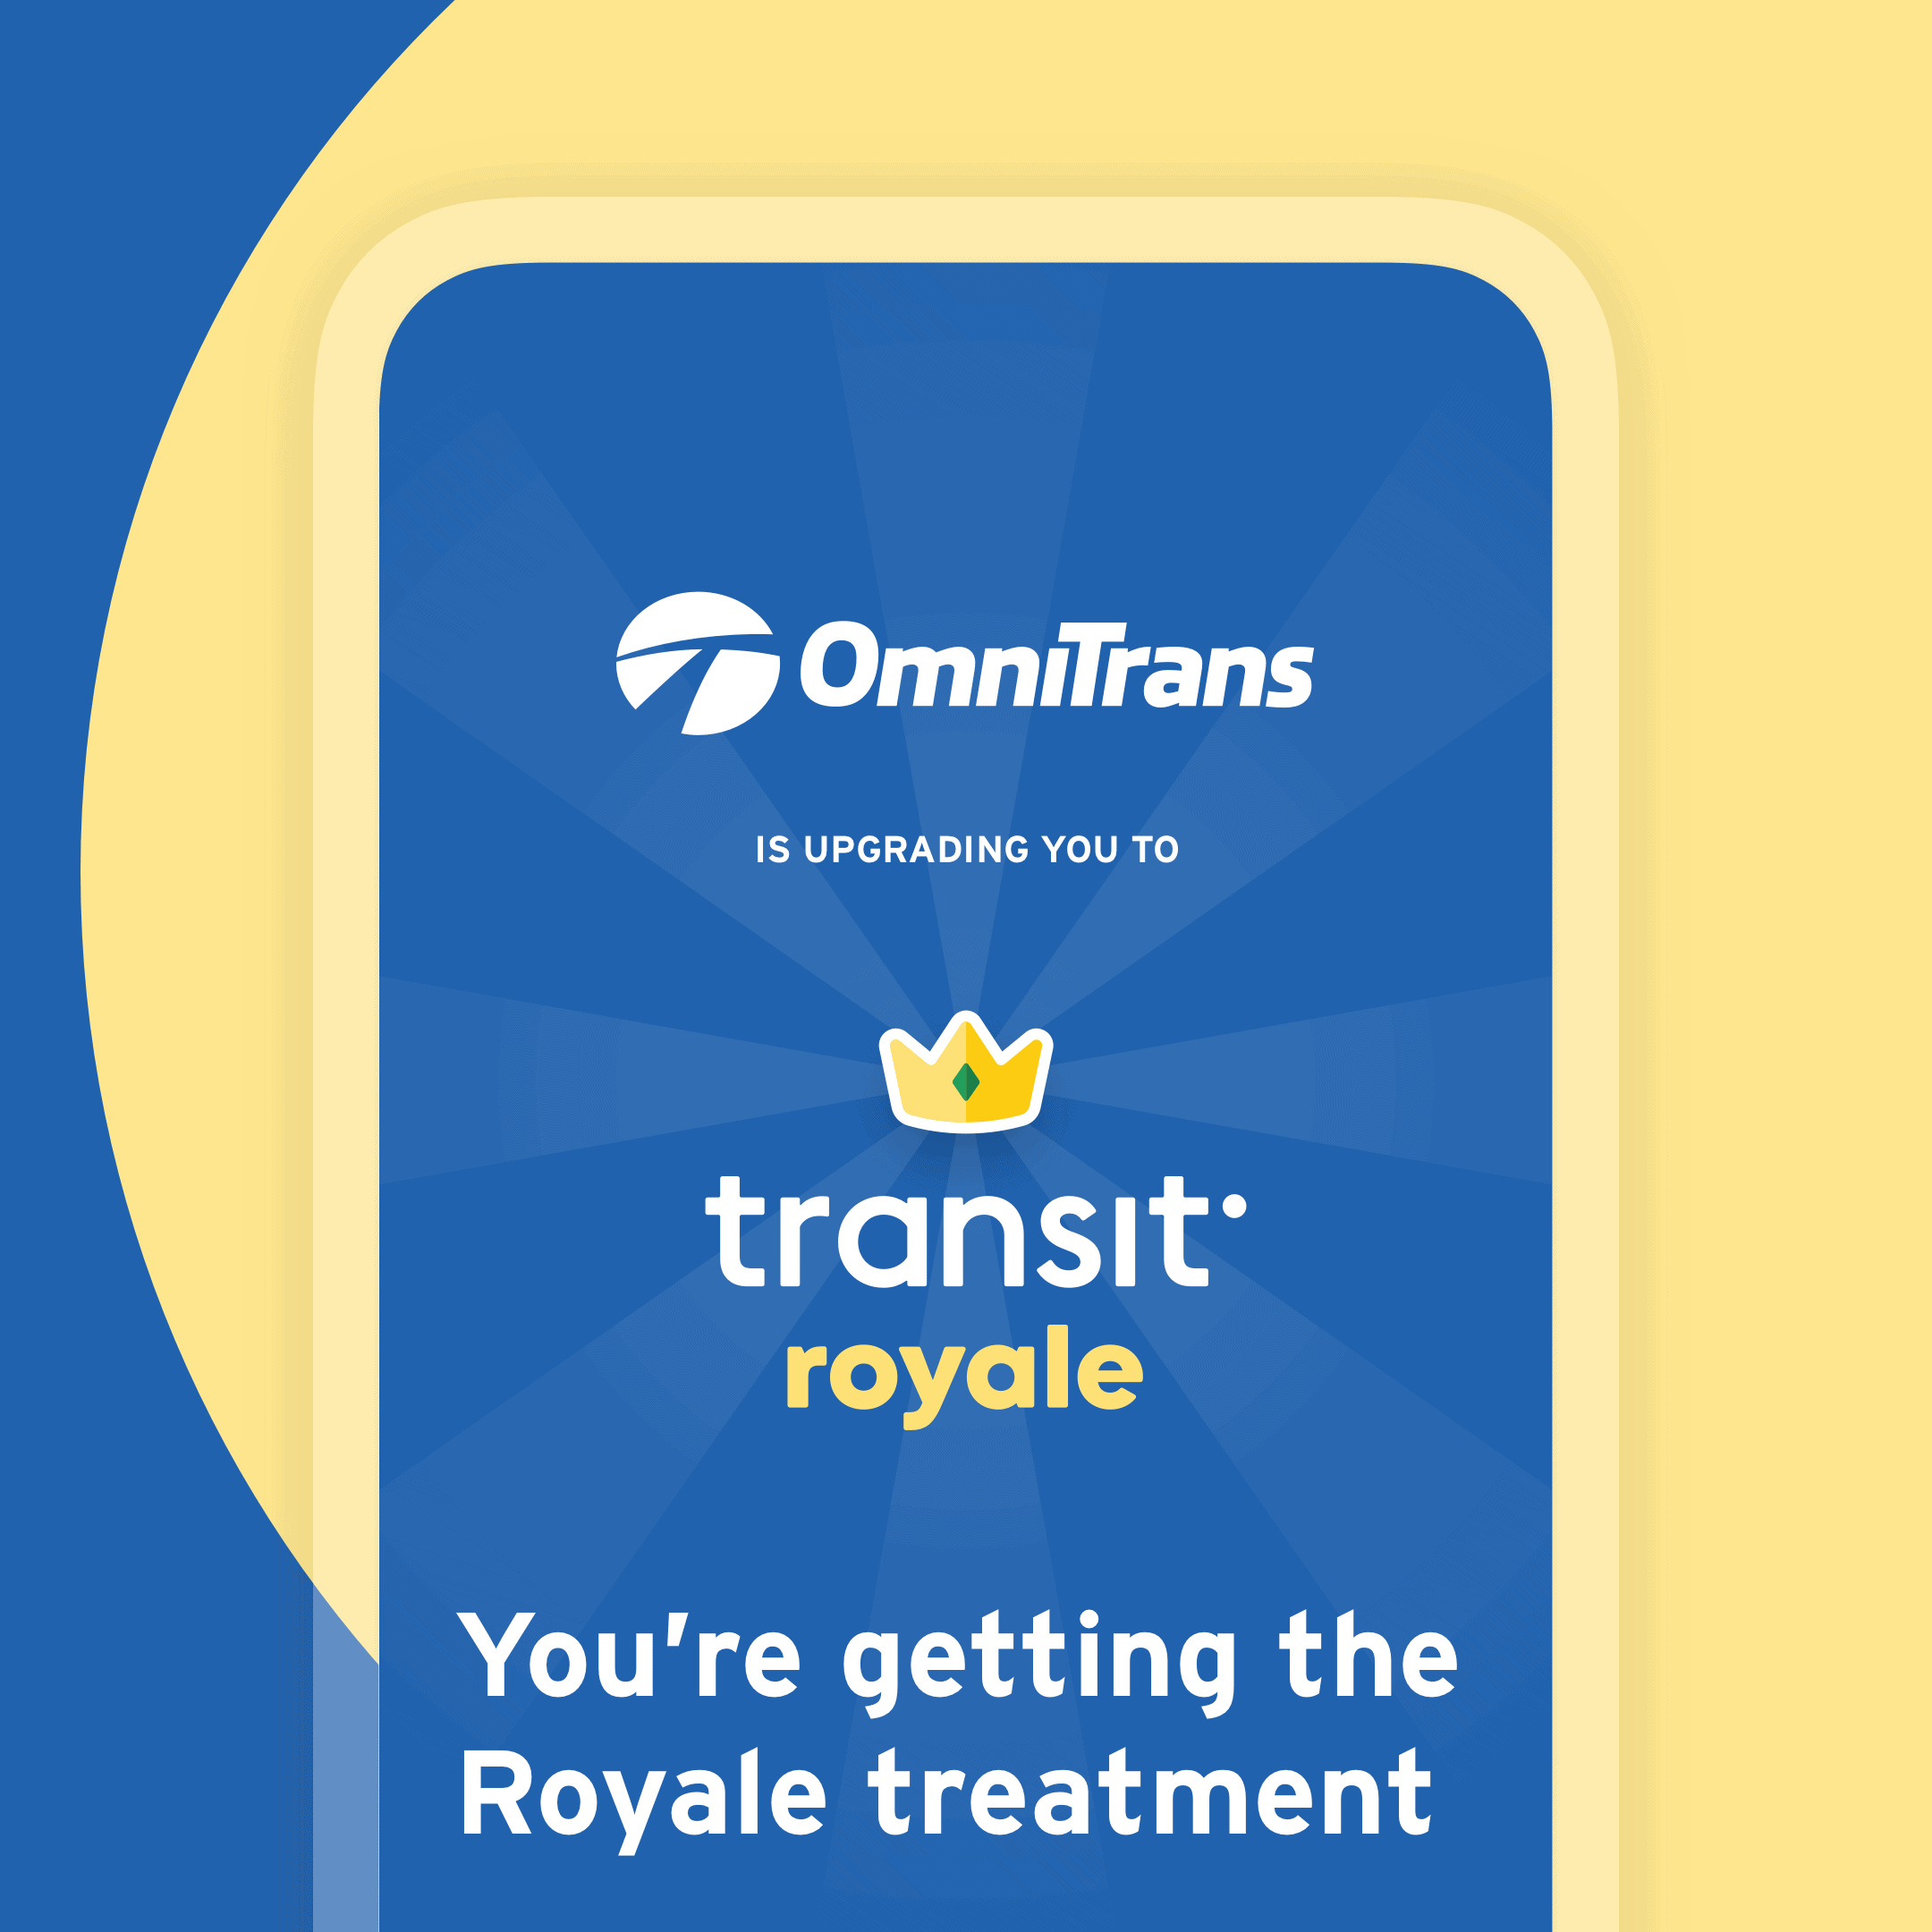 Omnitrans offers upgraded Transit app experience to all customers!